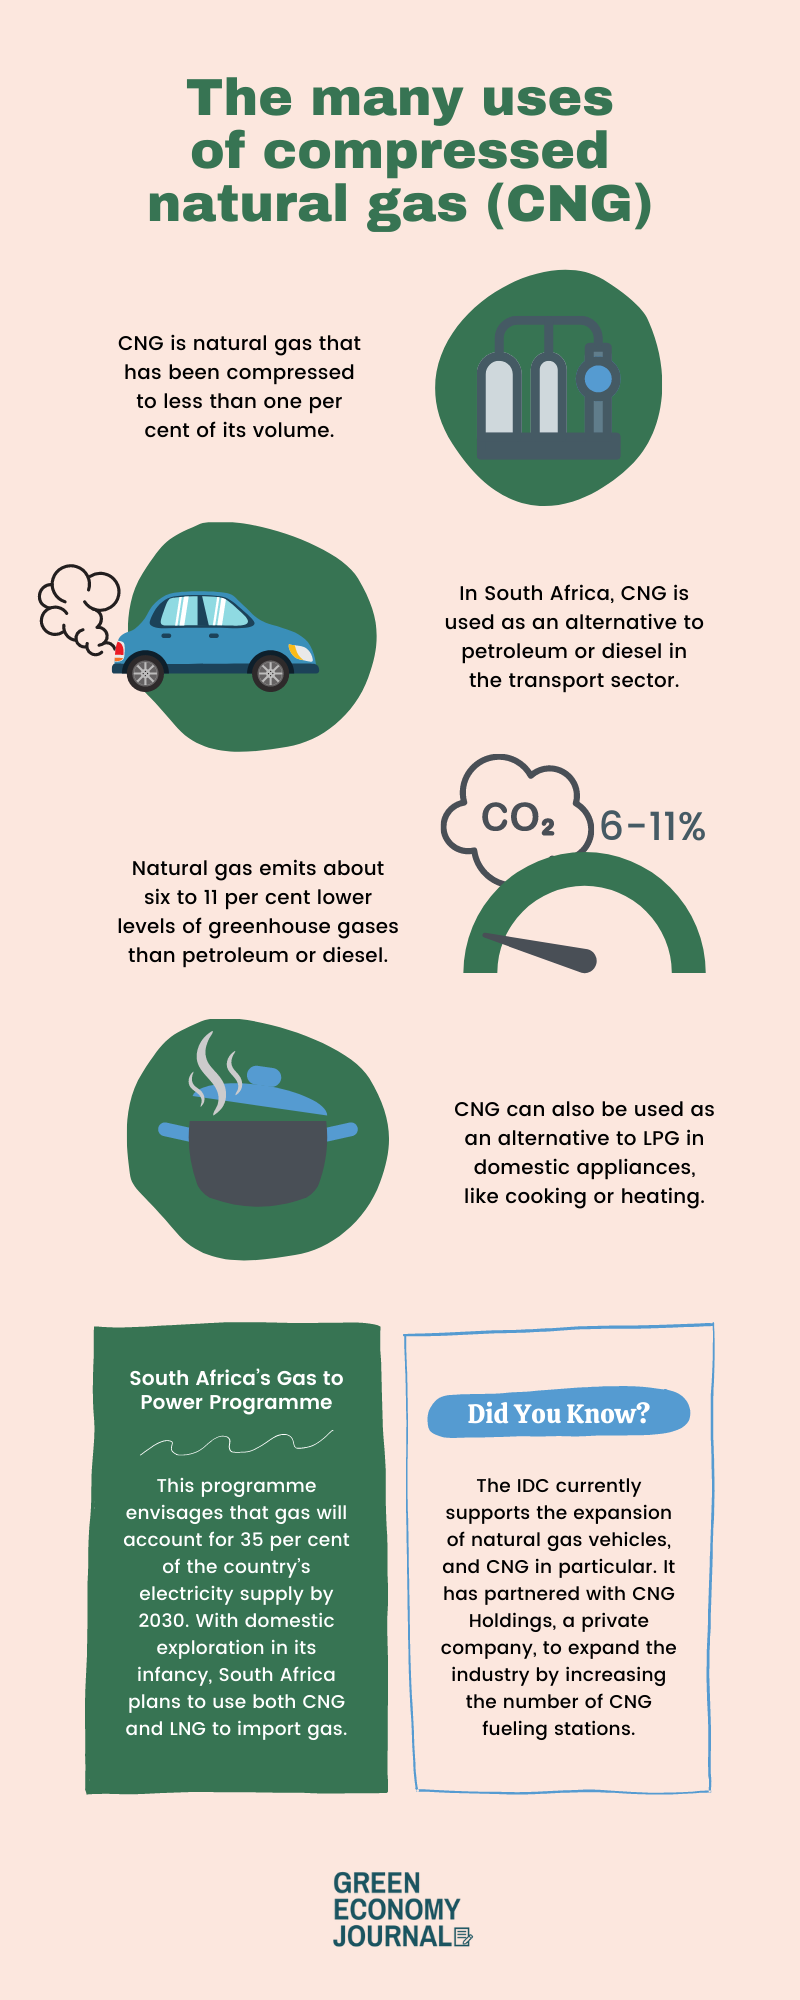 The many uses of compressed natural gas (CNG)